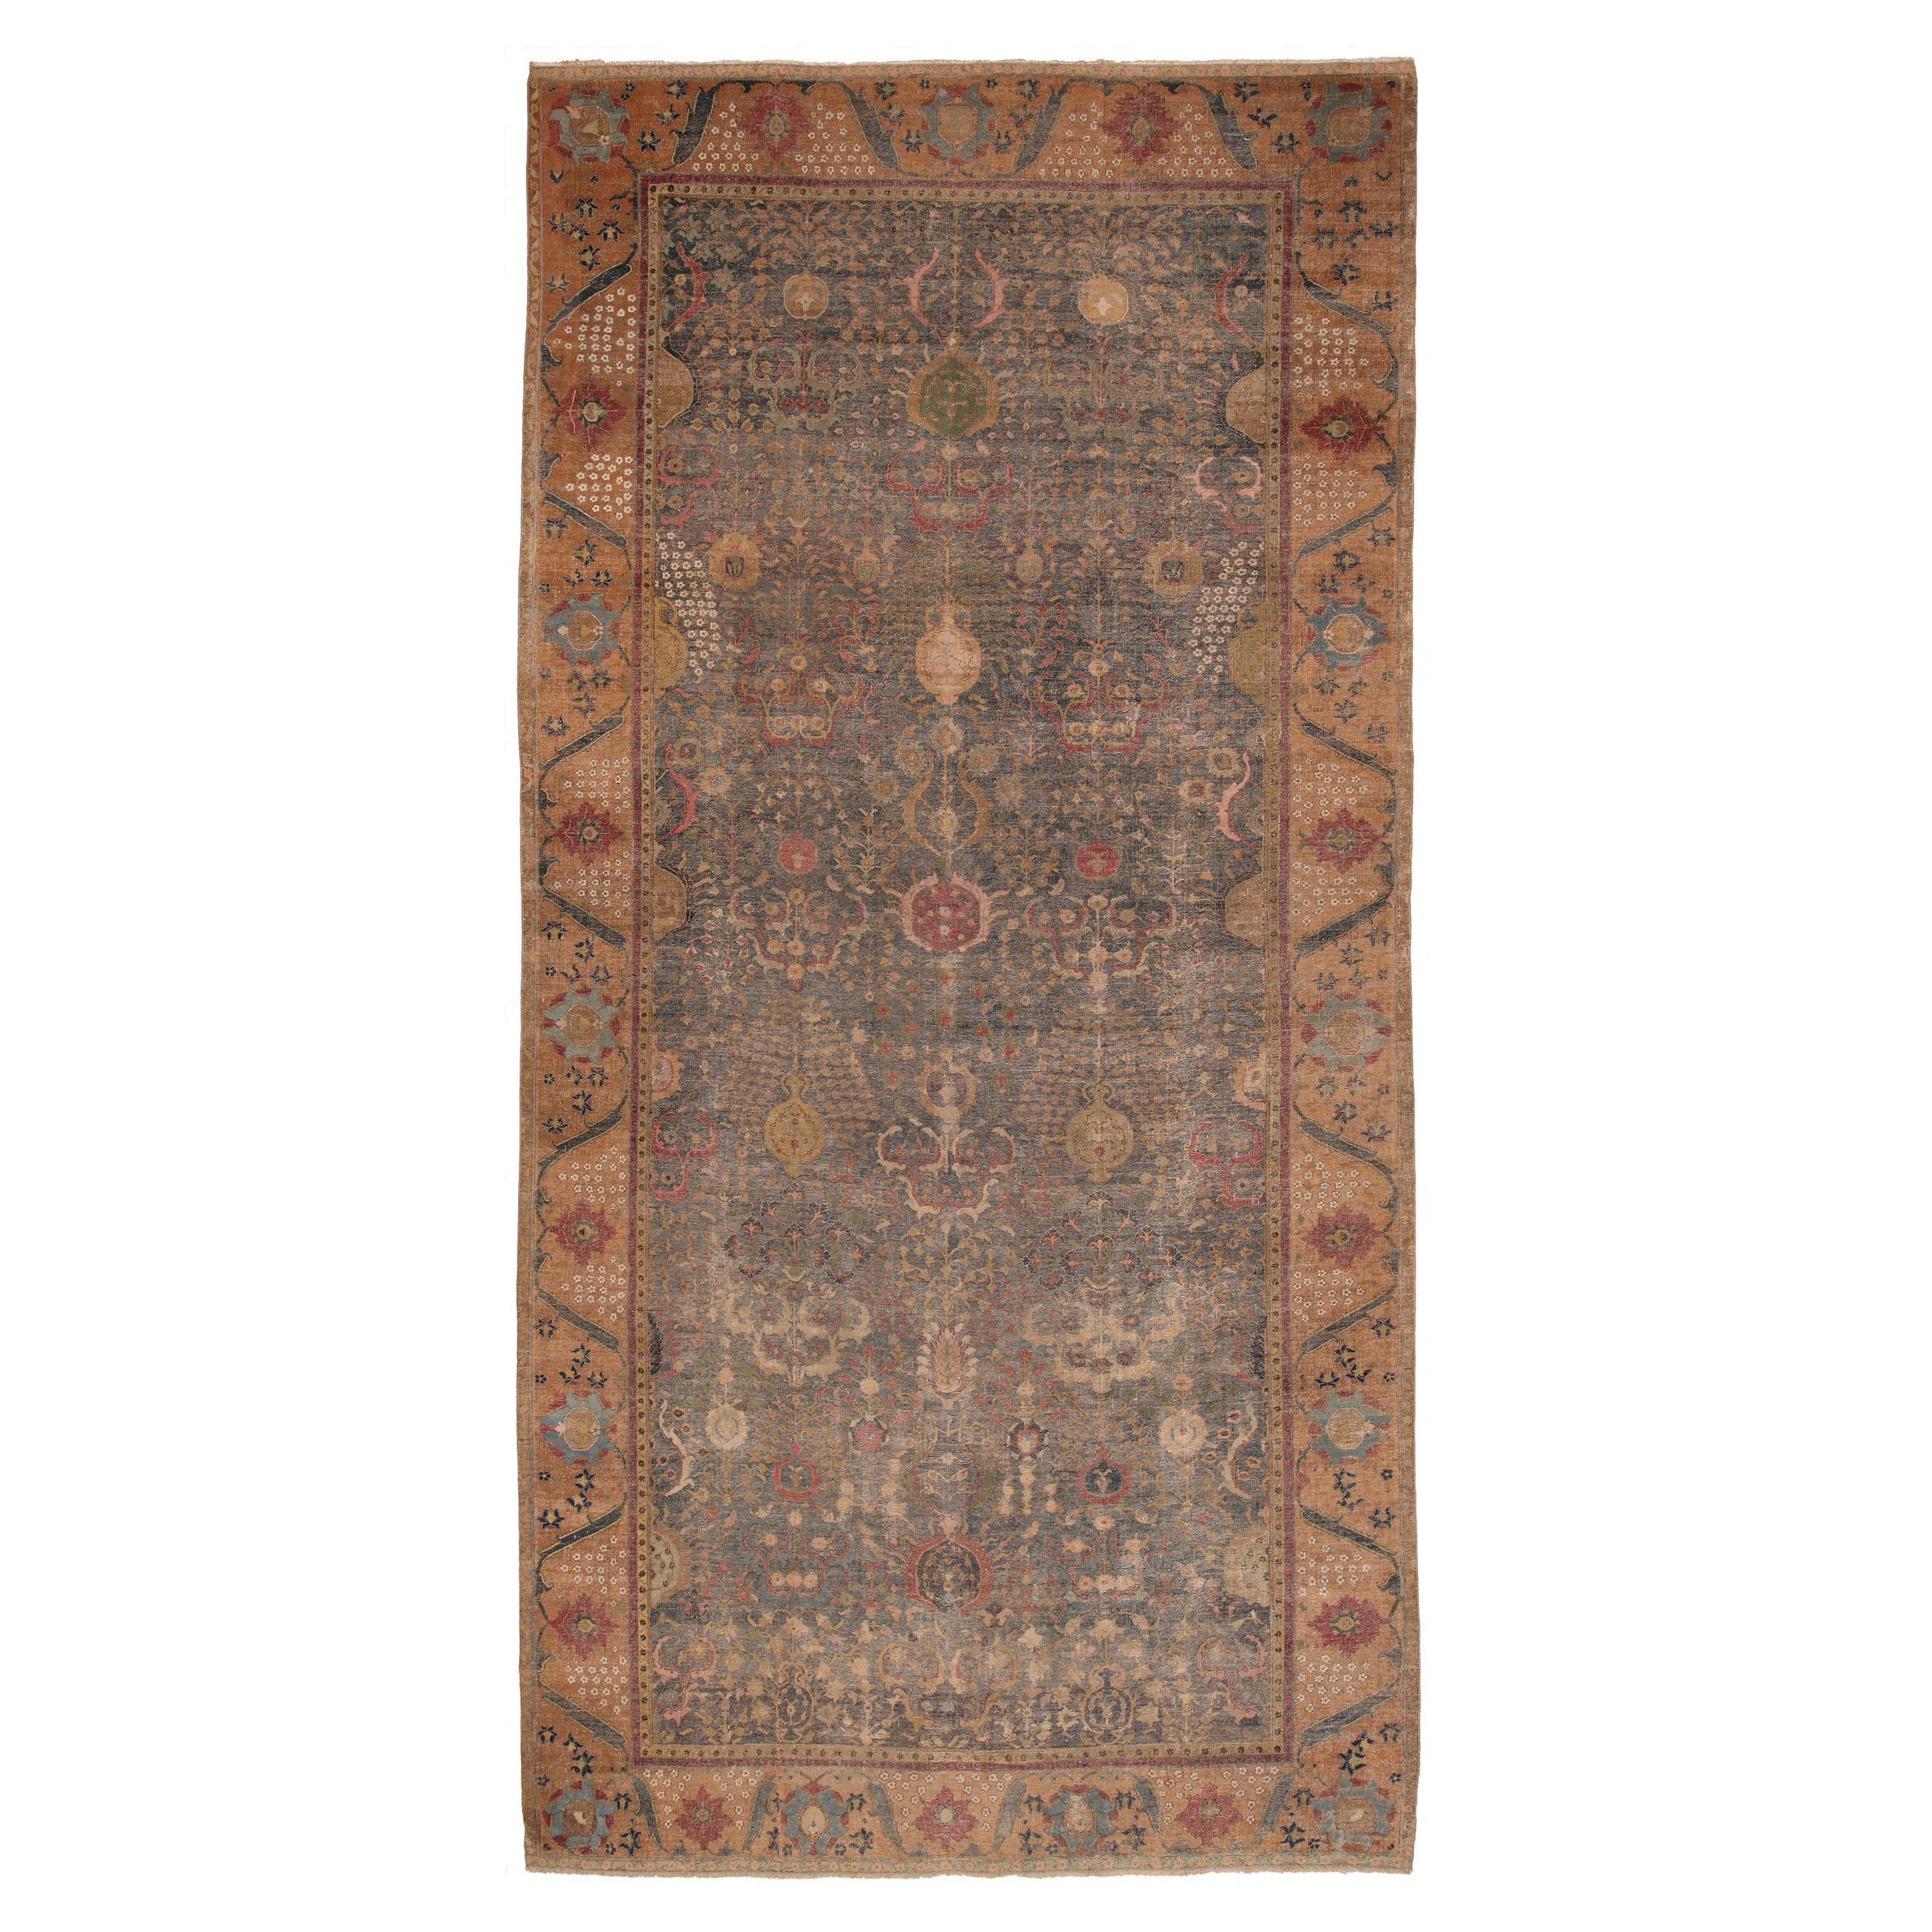 Antique 17th Century Persian Isfahan Rug. 9ft x 18 ft 4in